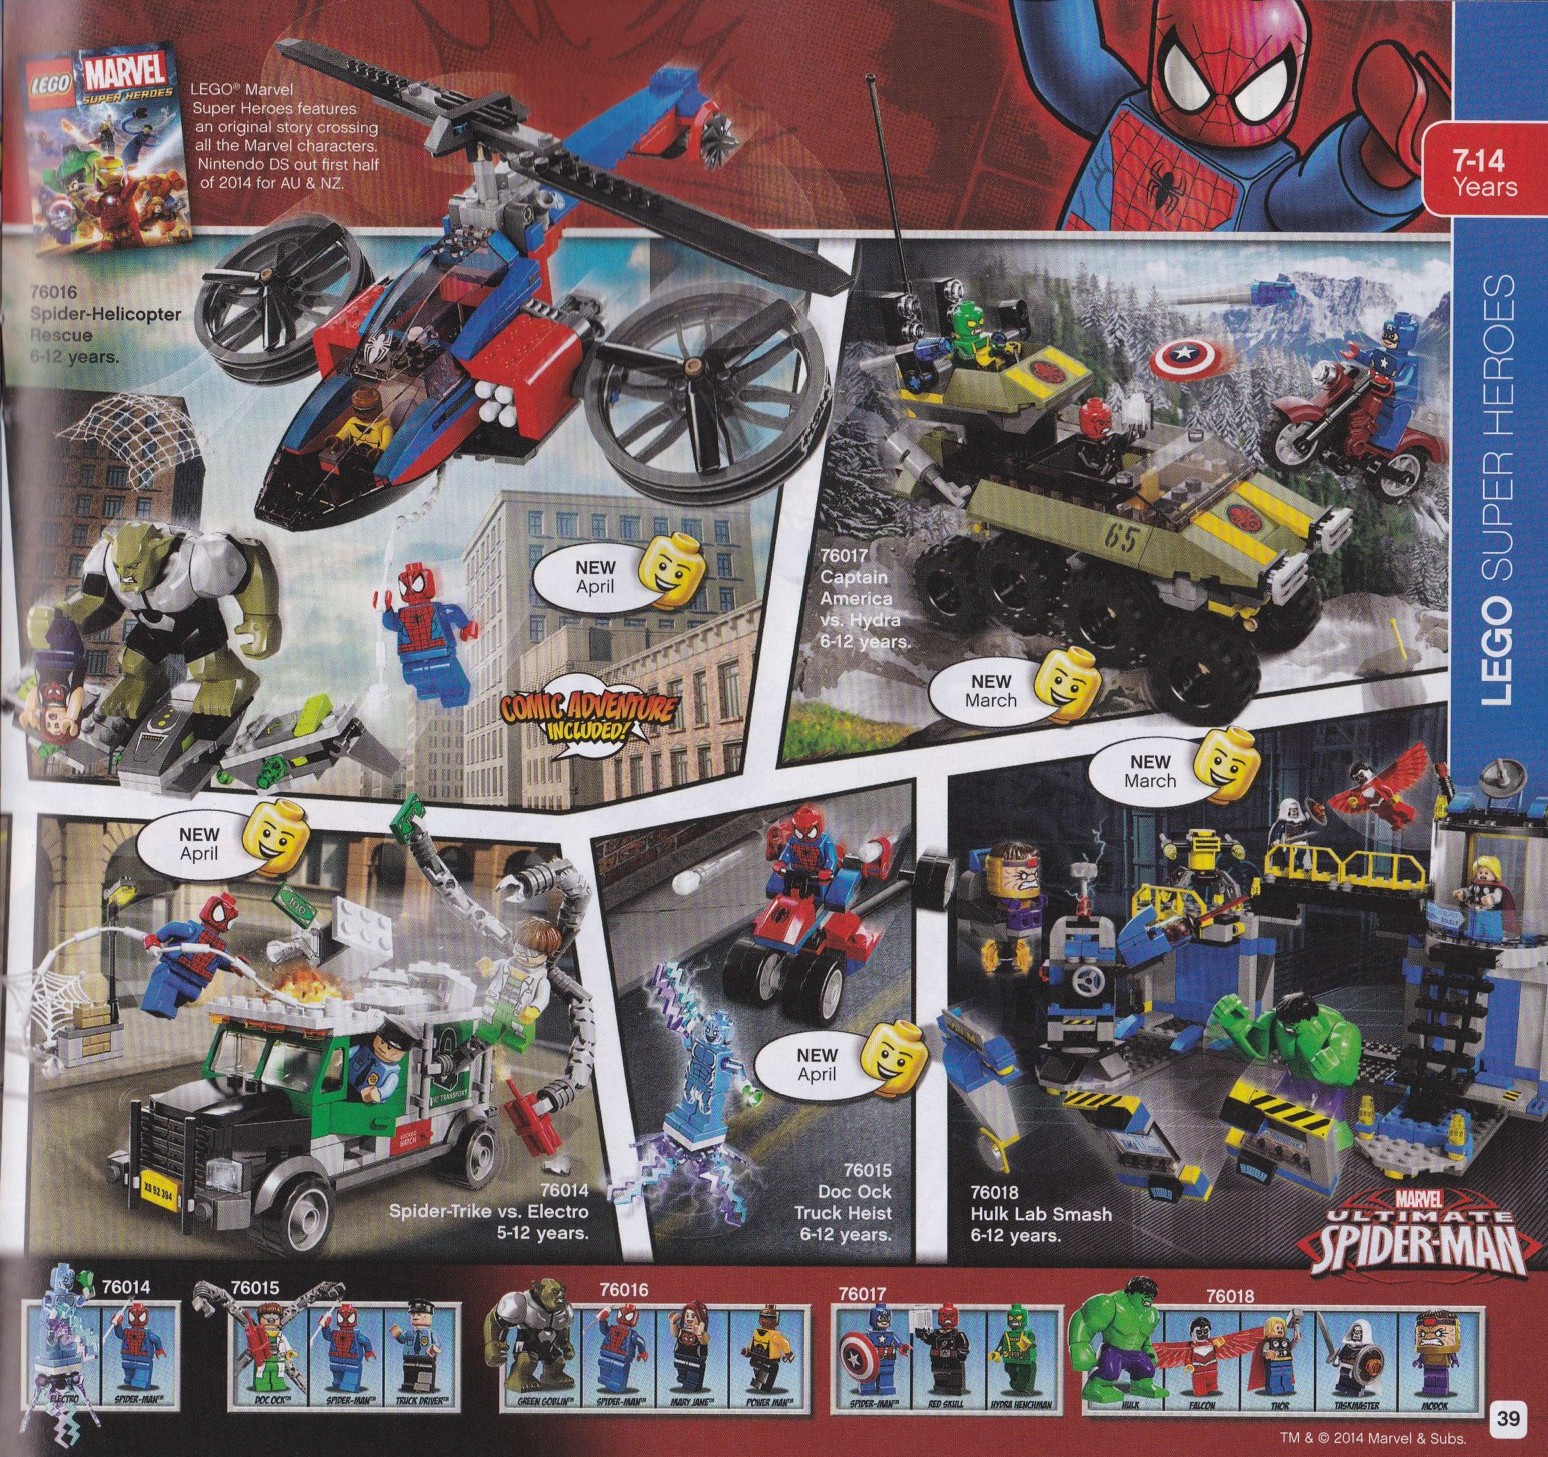 Download this Lego Marvel Sets Photos Superheroes picture